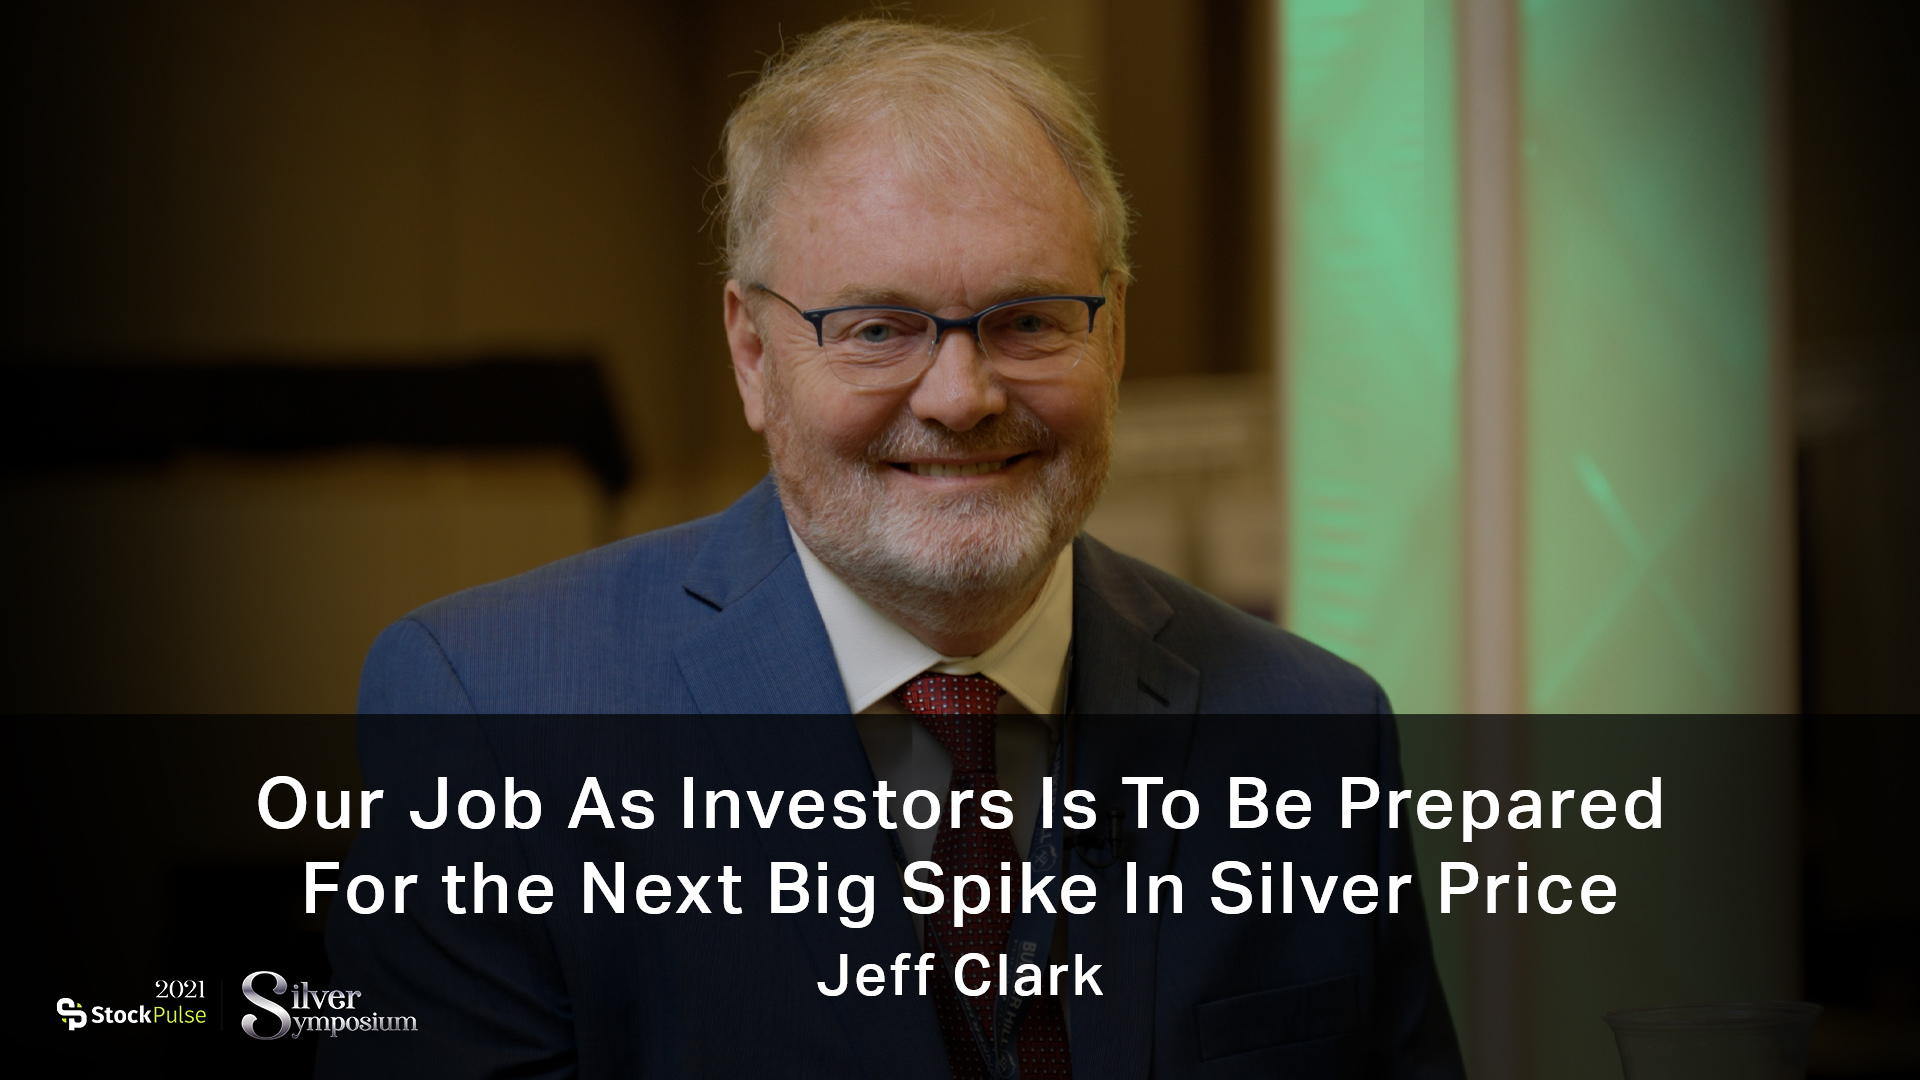 Jeff Clark: Our Job As Investors Is To Be Prepared For the Next Big Spike In Silver Price